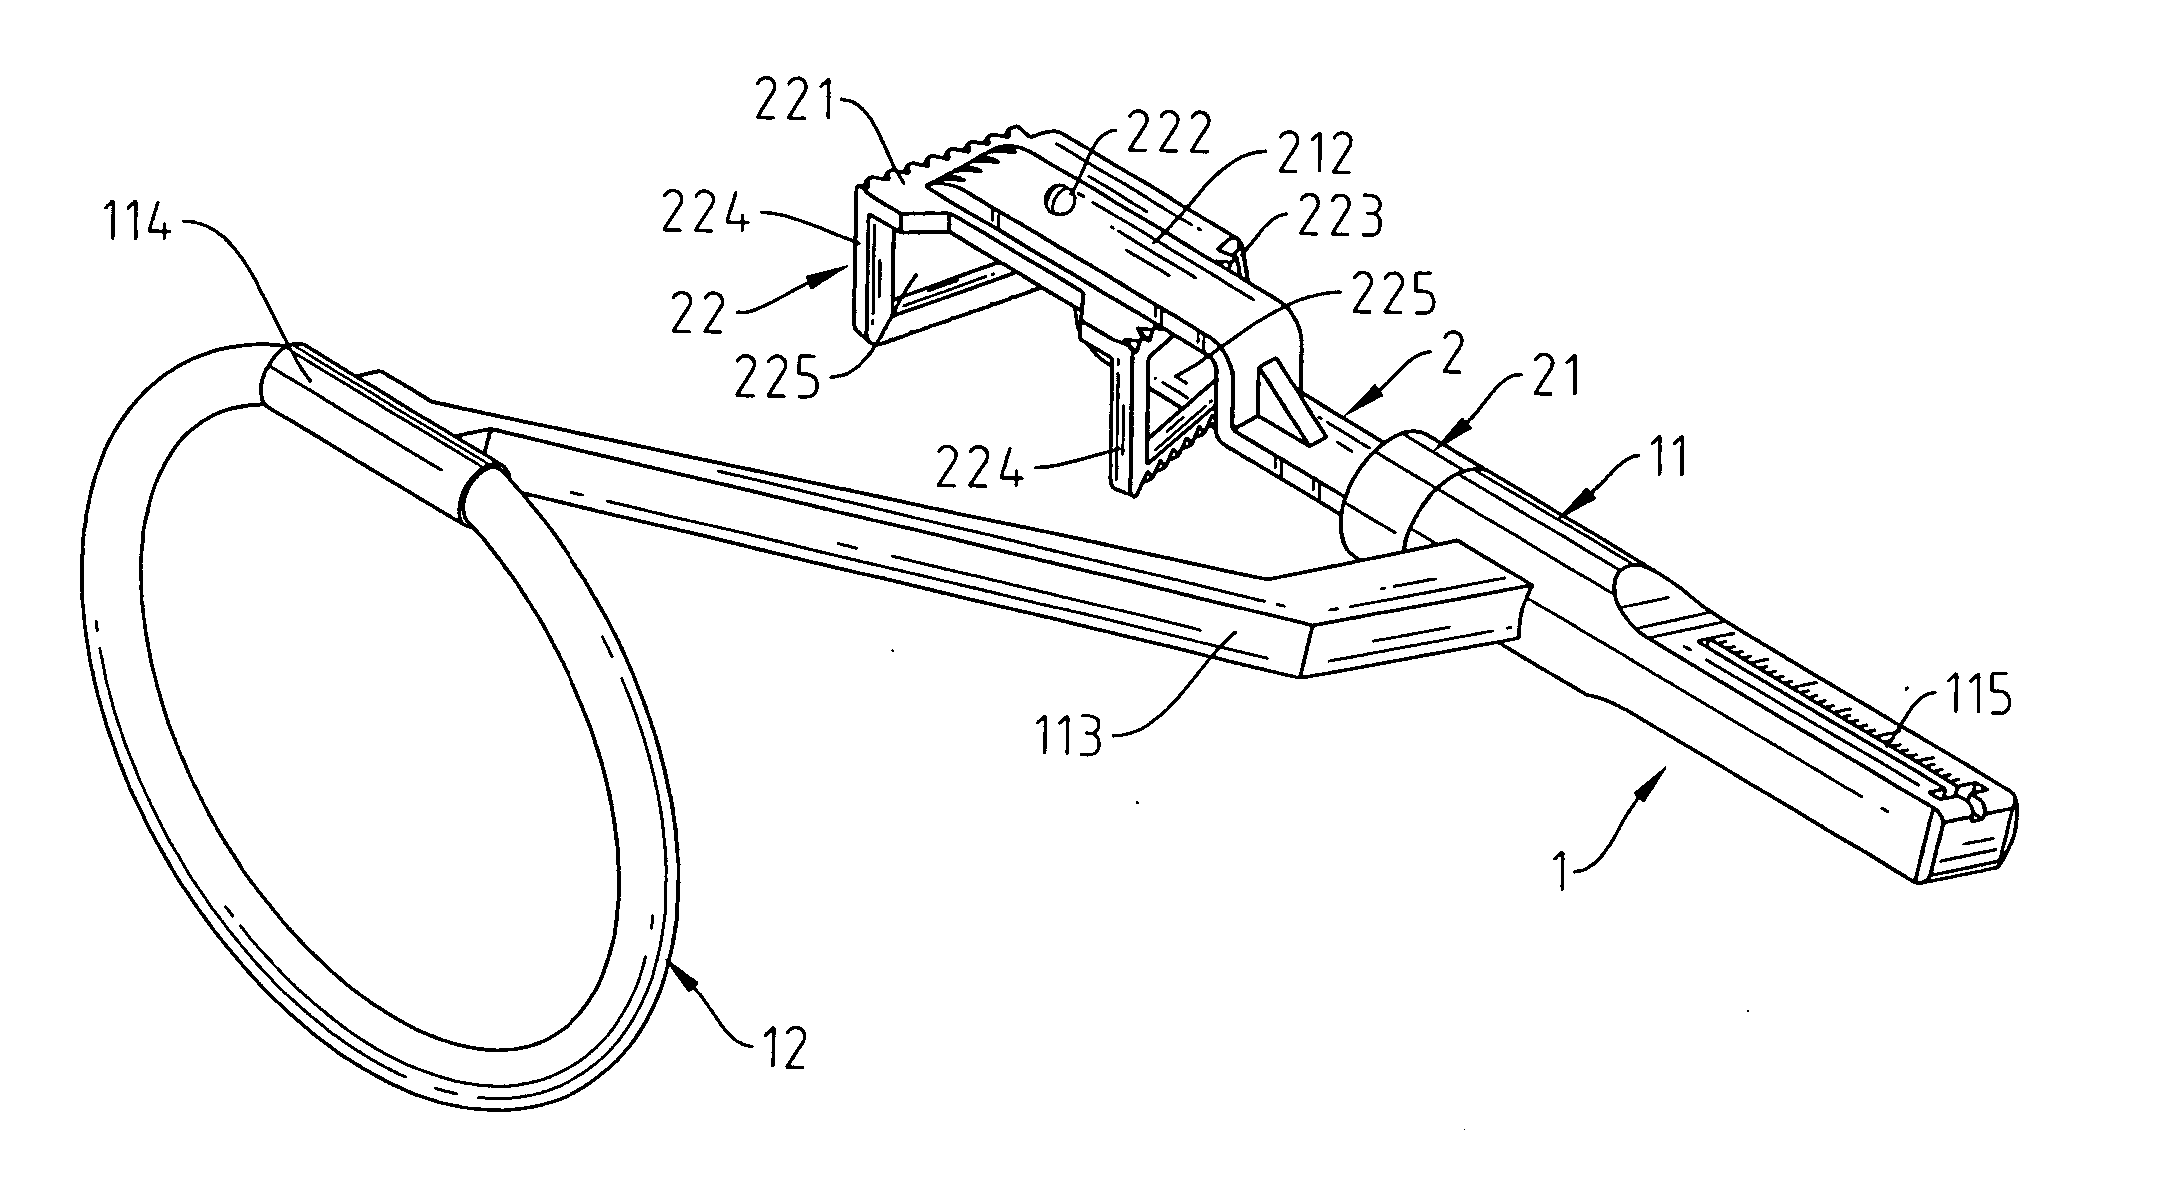 Dental X-ray clamping device with a multi-orientation support